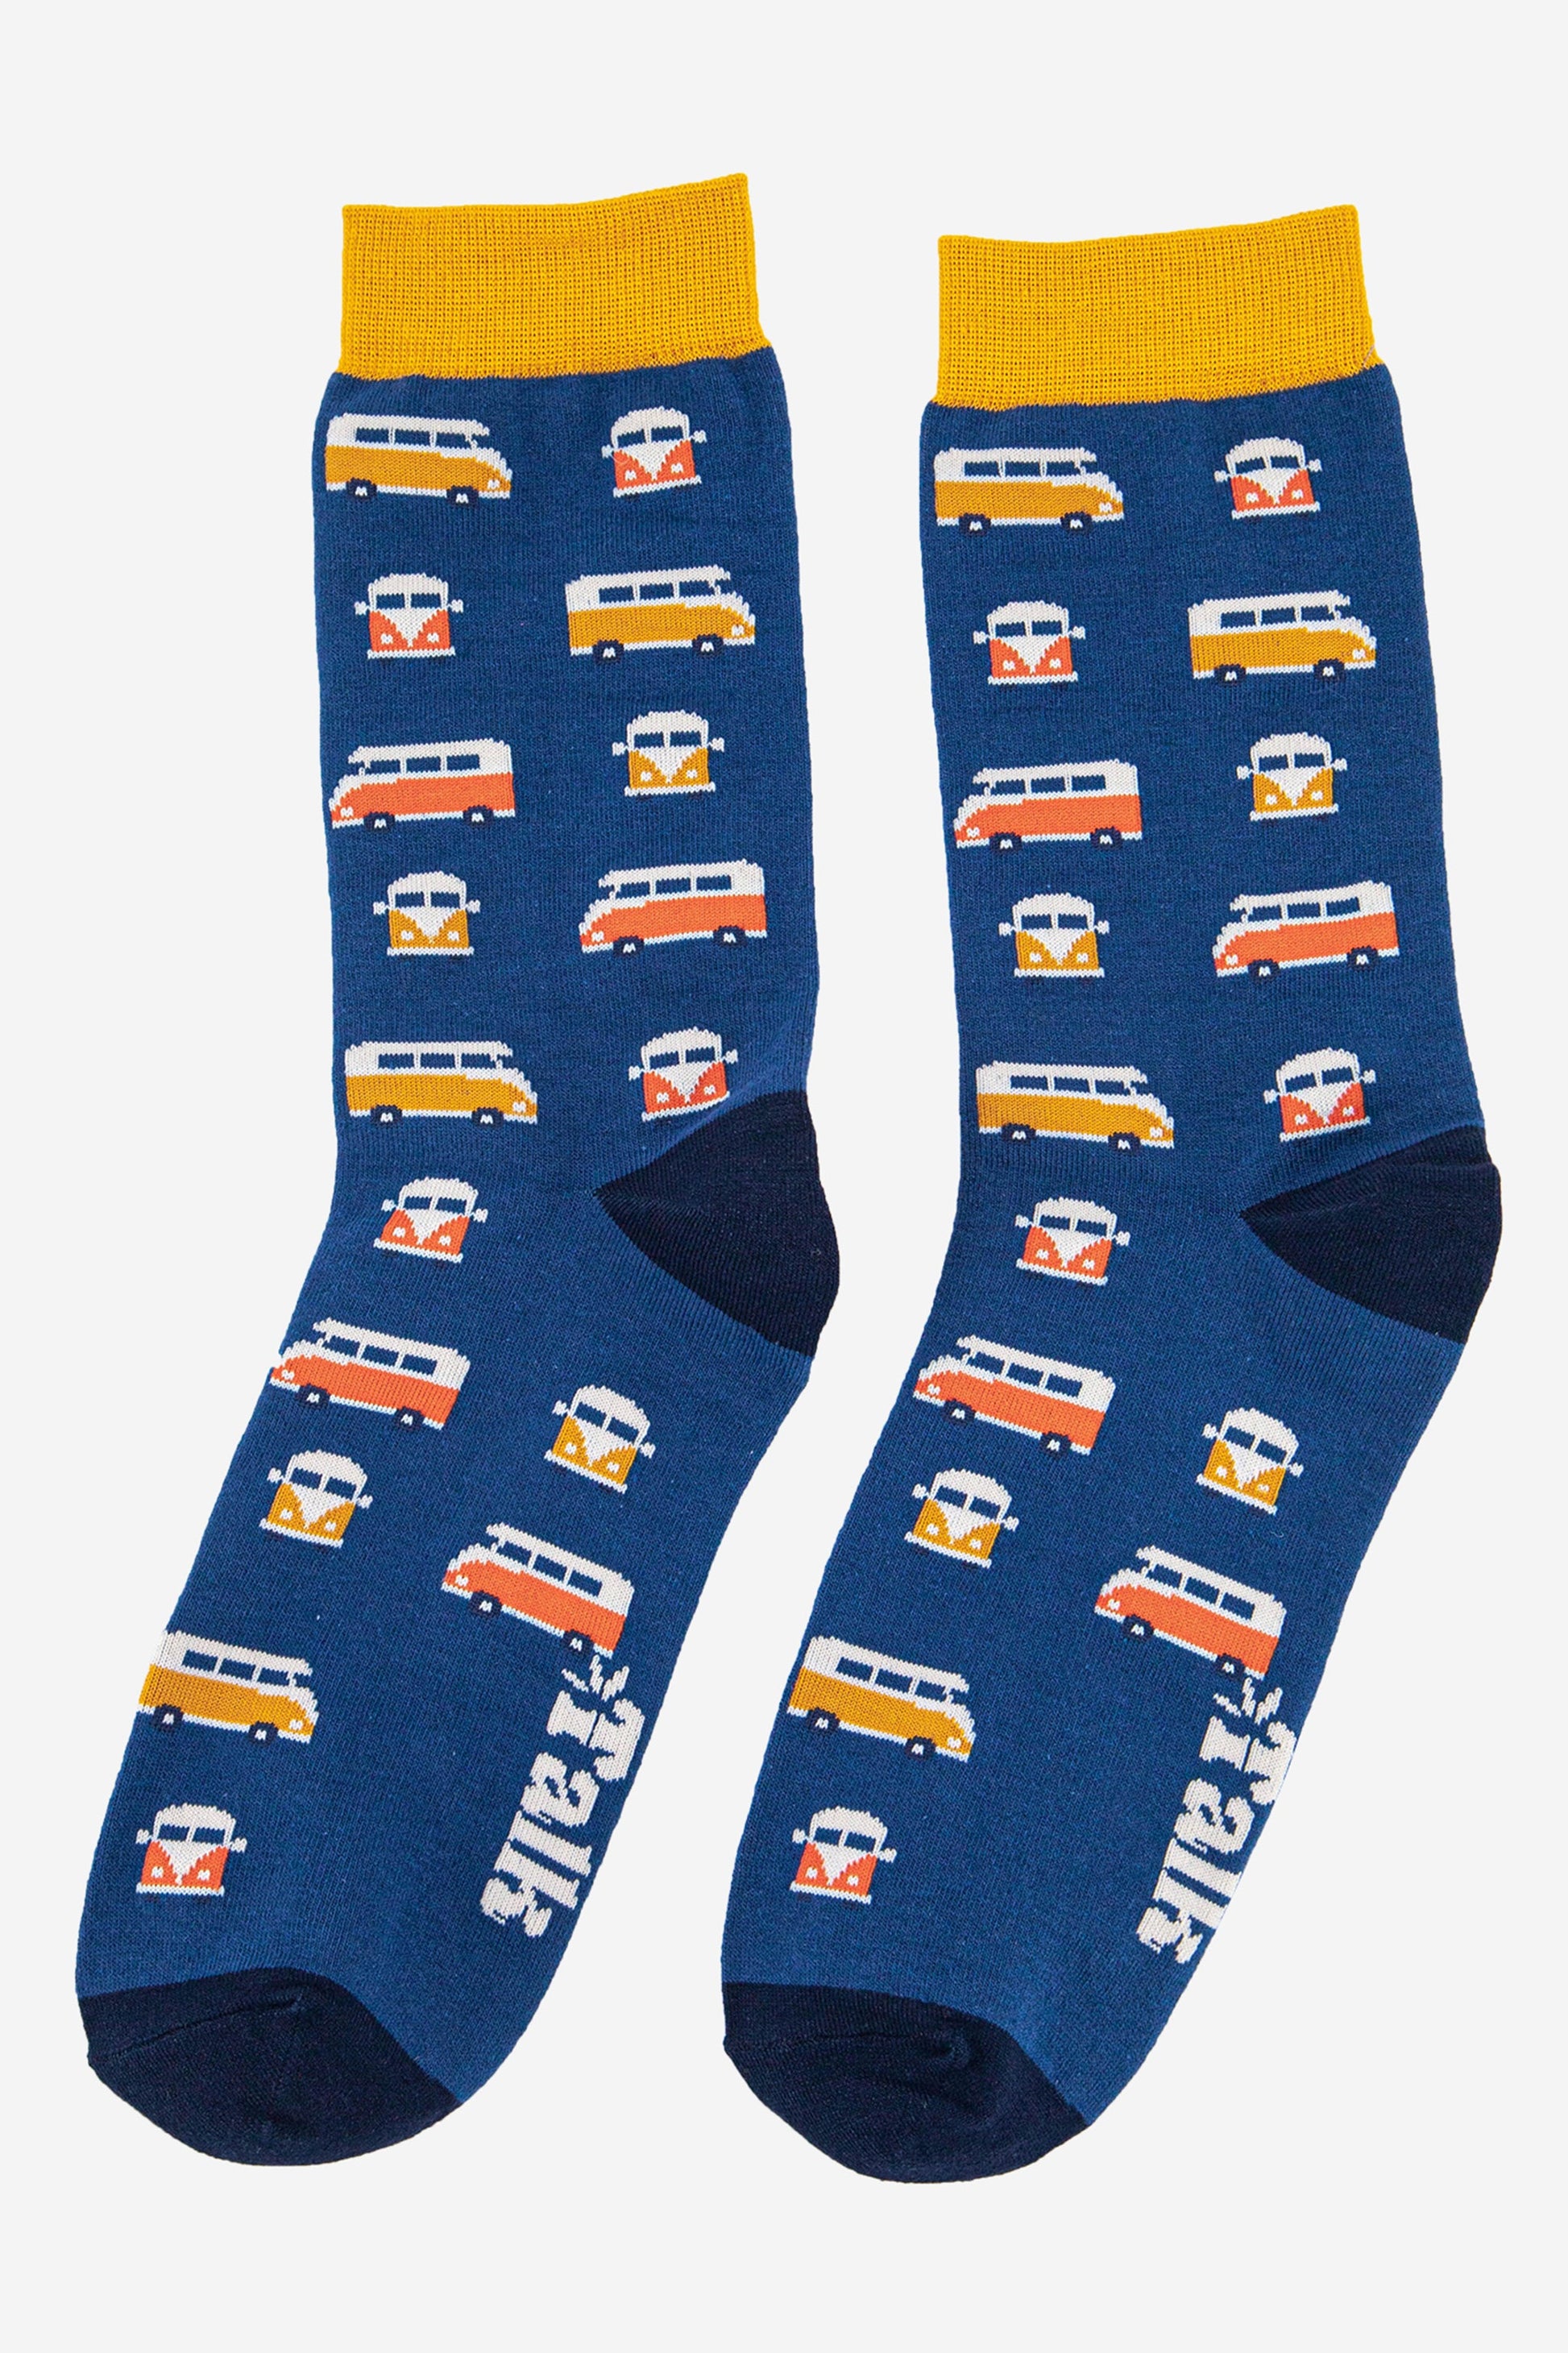 mens novelty dress socks featuring an all over pattern of orange and yellow campervans